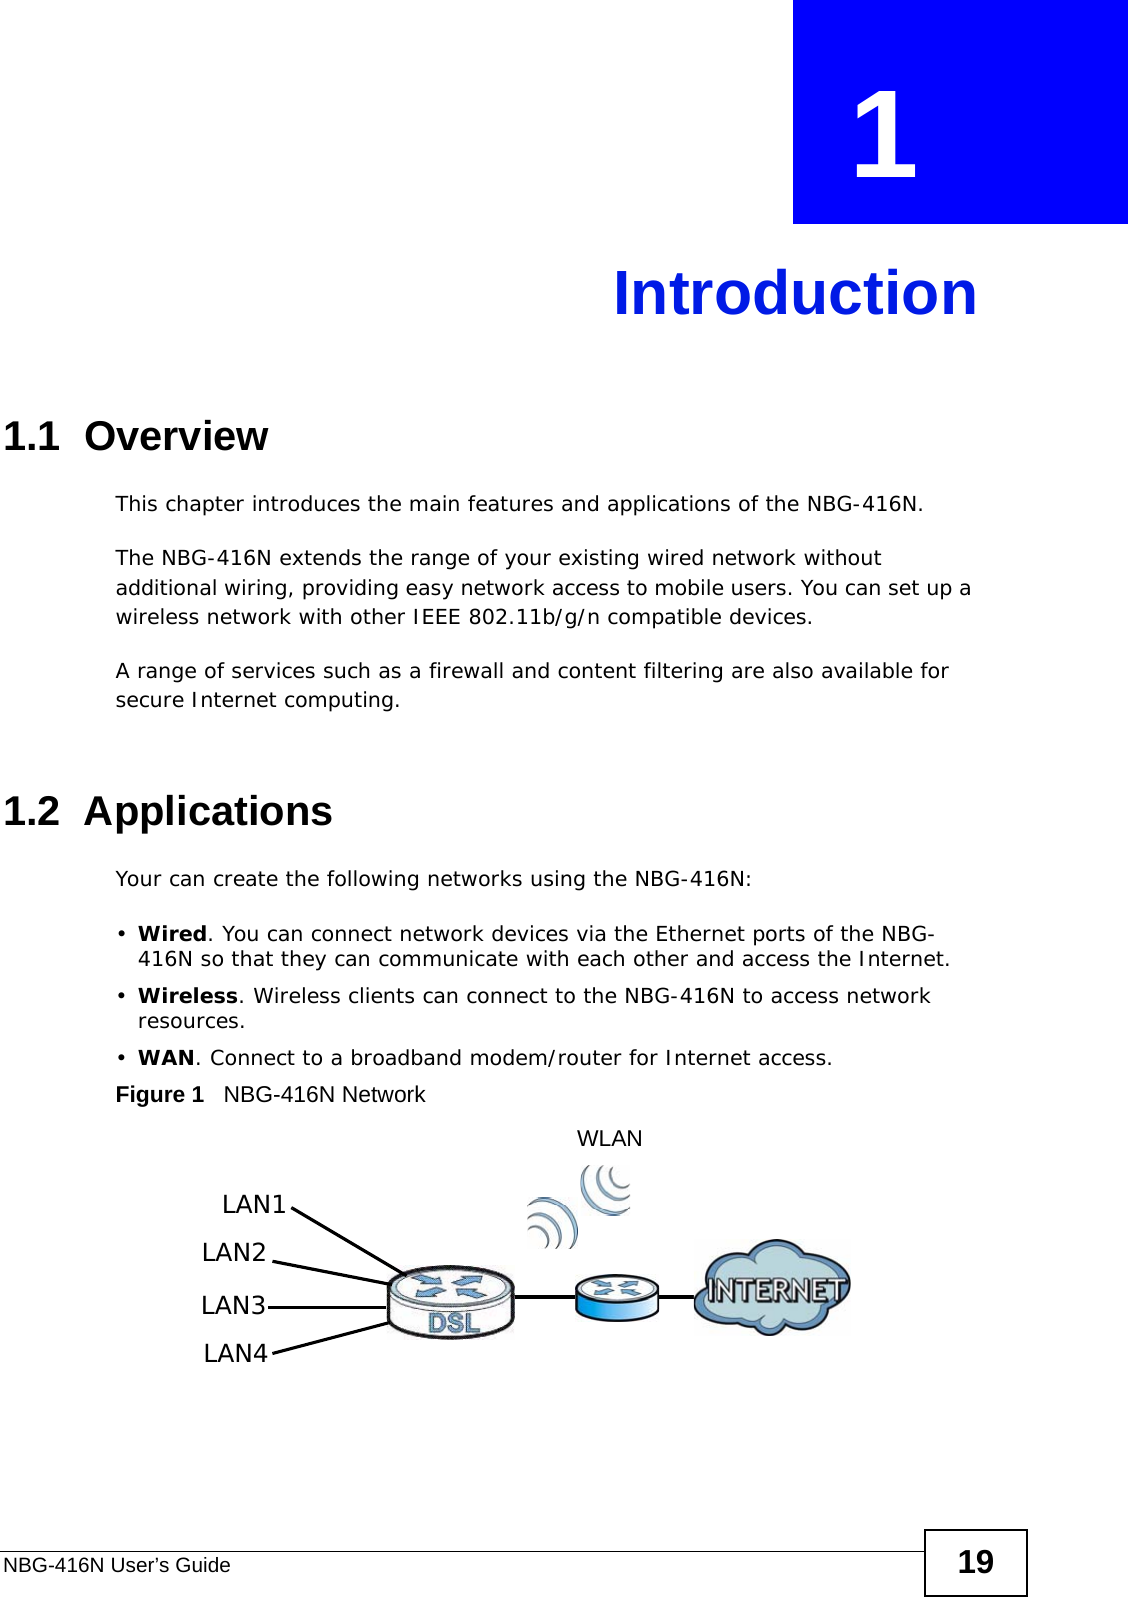 NBG-416N User’s Guide 19CHAPTER  1 Introduction1.1  OverviewThis chapter introduces the main features and applications of the NBG-416N.The NBG-416N extends the range of your existing wired network without additional wiring, providing easy network access to mobile users. You can set up a wireless network with other IEEE 802.11b/g/n compatible devices.A range of services such as a firewall and content filtering are also available for secure Internet computing.1.2  ApplicationsYour can create the following networks using the NBG-416N:•Wired. You can connect network devices via the Ethernet ports of the NBG-416N so that they can communicate with each other and access the Internet.•Wireless. Wireless clients can connect to the NBG-416N to access network resources.•WAN. Connect to a broadband modem/router for Internet access.Figure 1   NBG-416N NetworkLAN1LAN2LAN3LAN4WLAN